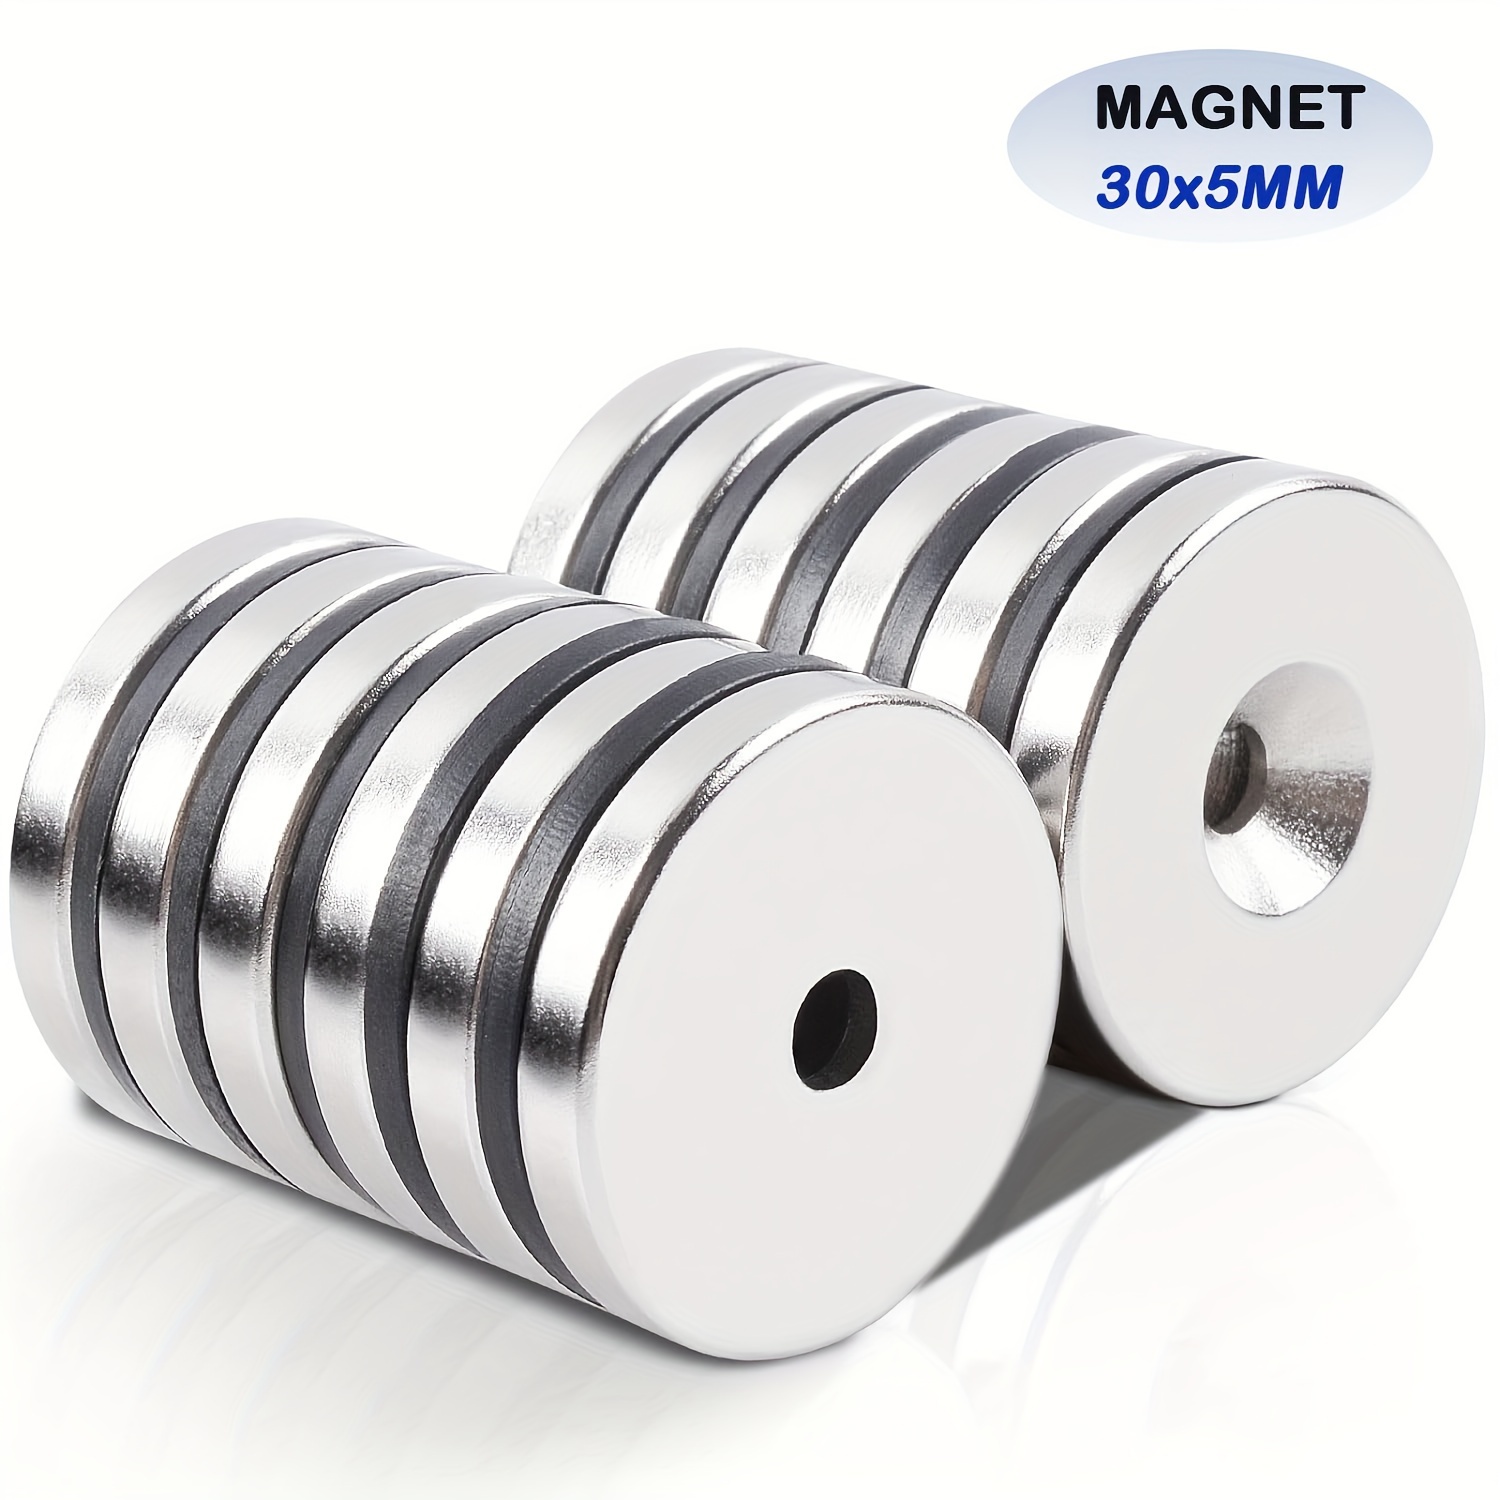 

10pcs 30x5mm Strong Neodymium Magnets With Holes, Rare Earth Magnets, Magnetic Disc Countersunk Hole Magnets For Scientific, Laboratory, Industrial, Tool Storage Etc